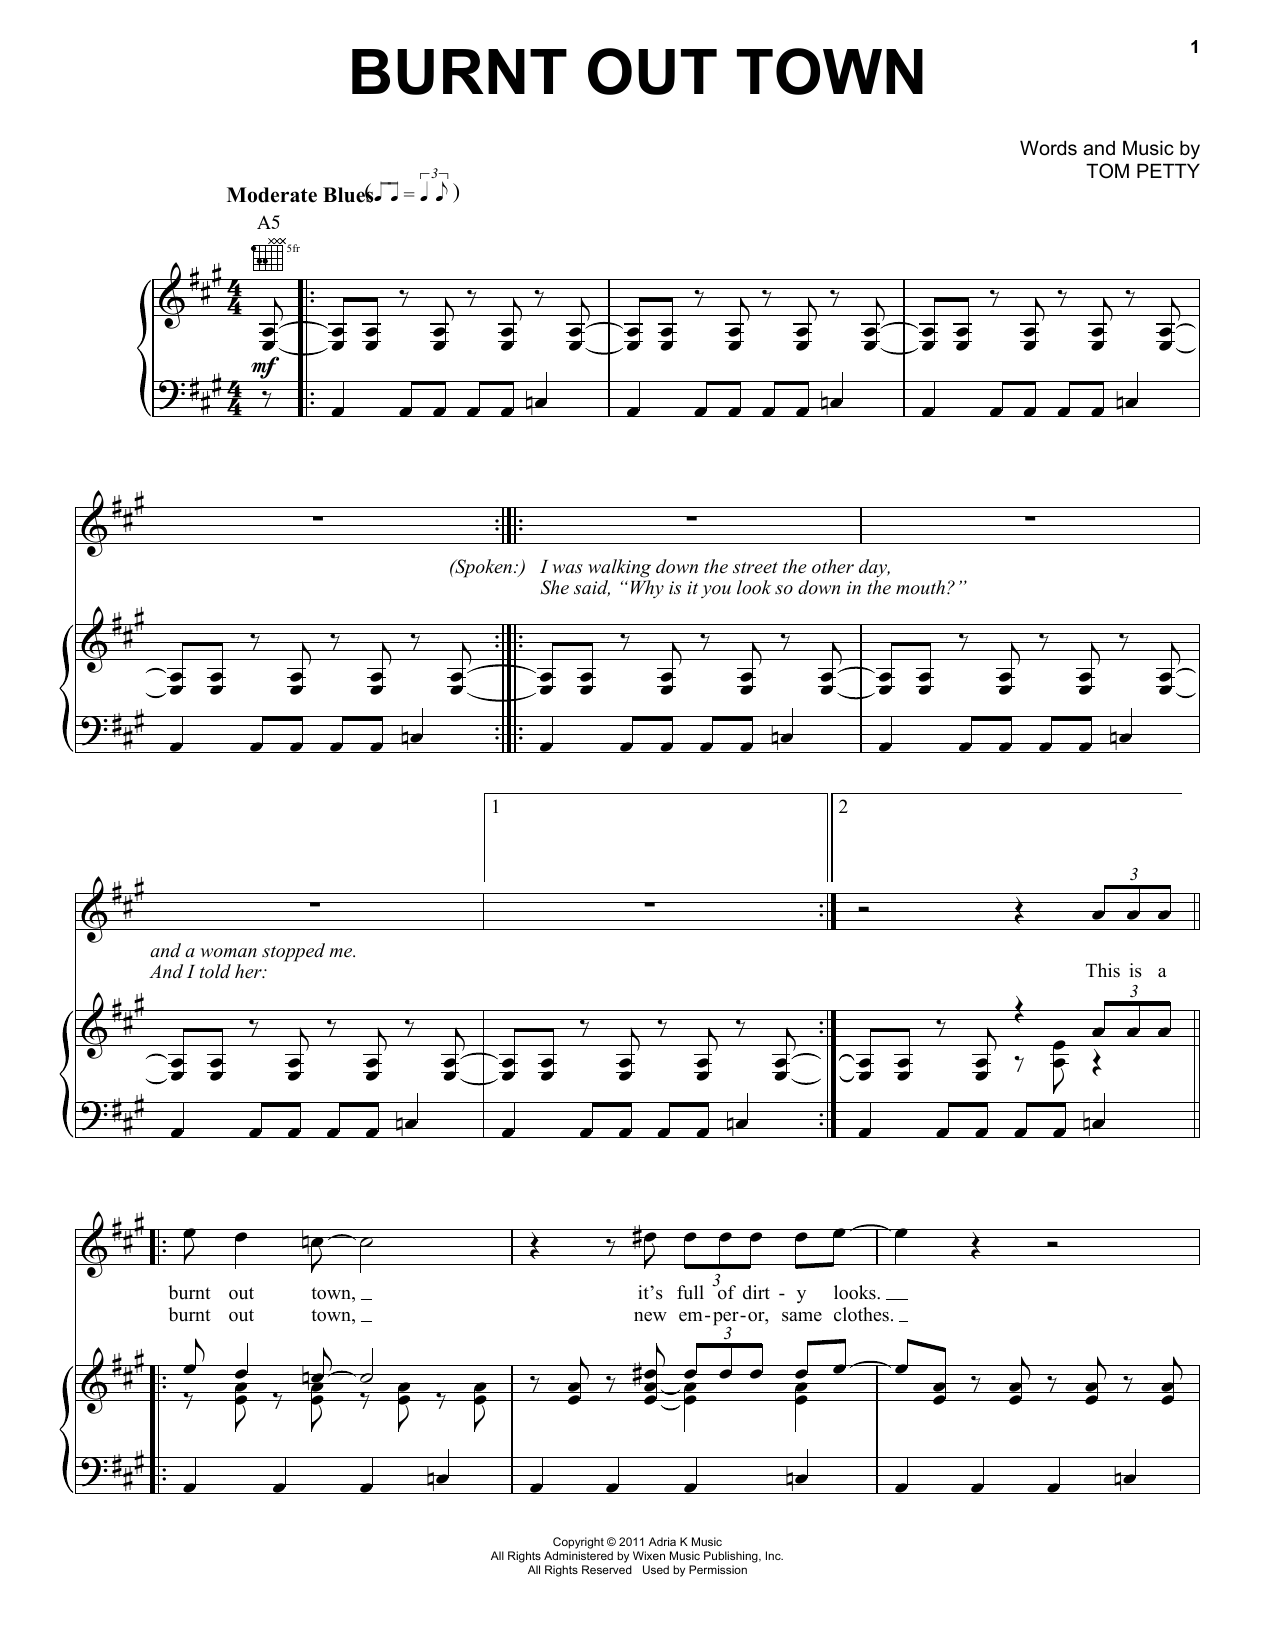 Download Tom Petty & the Heartbreakers Burnt Out Town Sheet Music